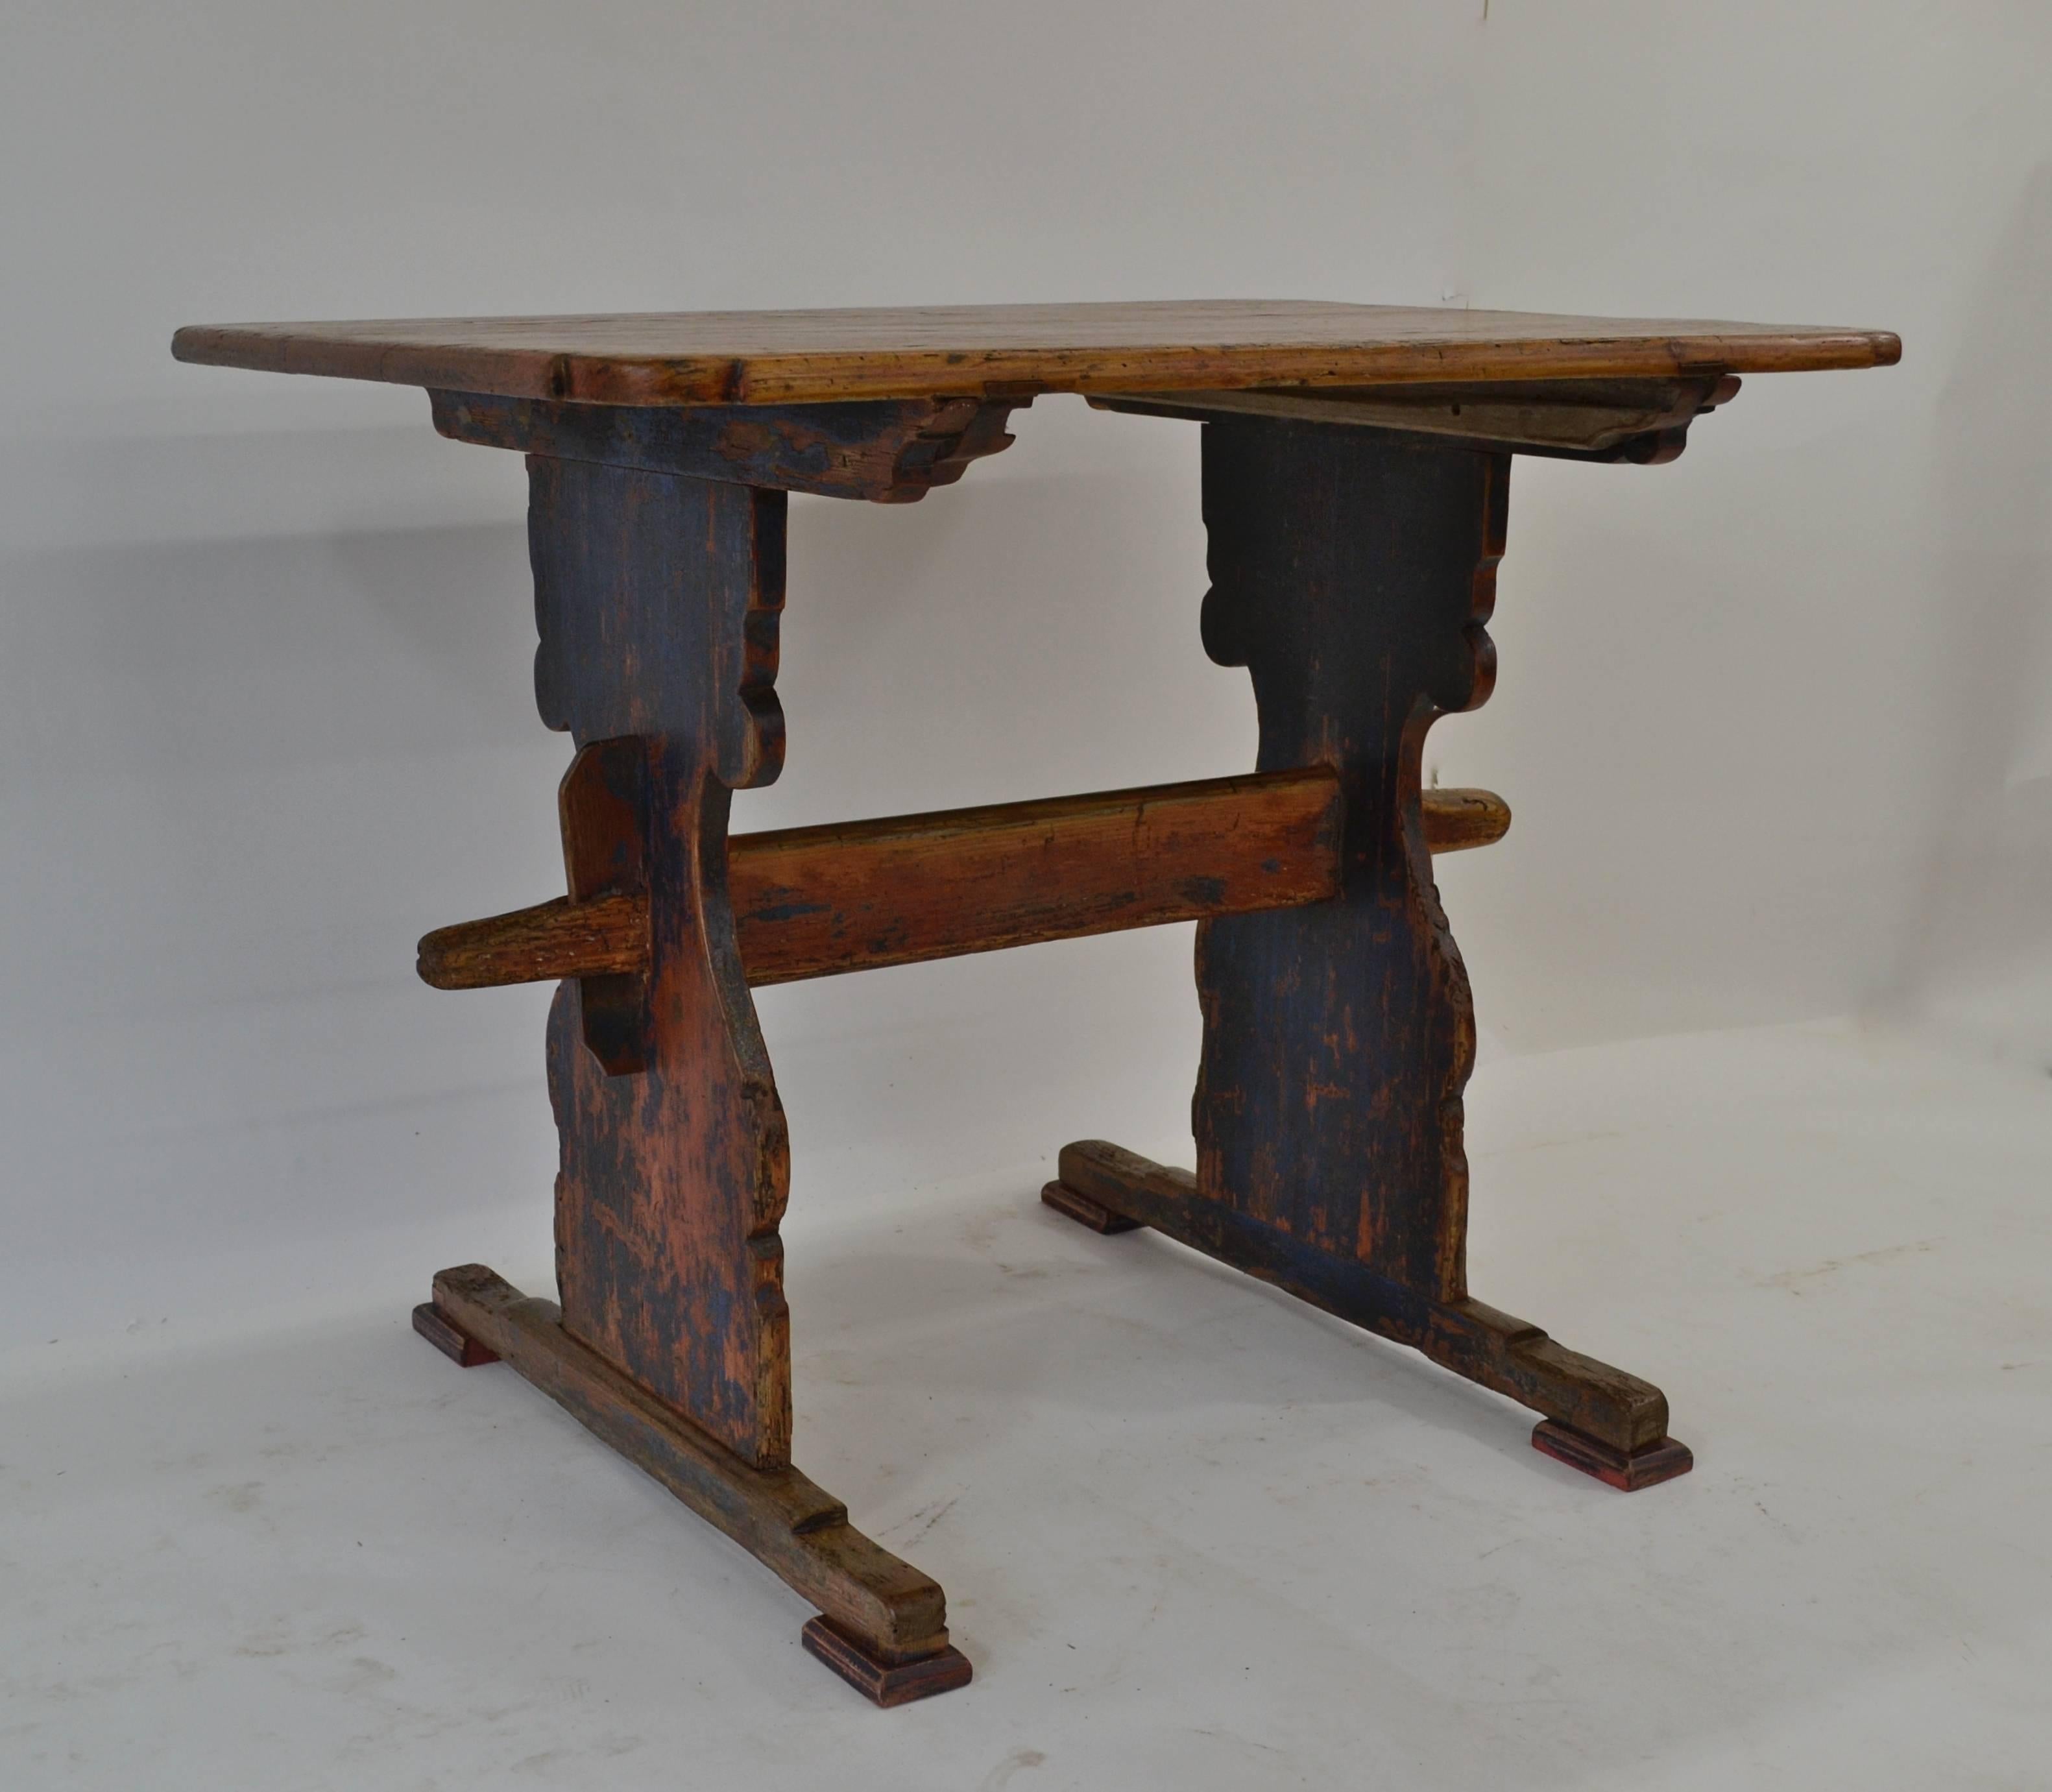 This is a table that brings a smile to your face. From its worn and pitted top with a neatly-executed diamond patch to its curiously sphinx-like feet with replaced rectangular pads, it is a delight to look at, both in appearance and construction.